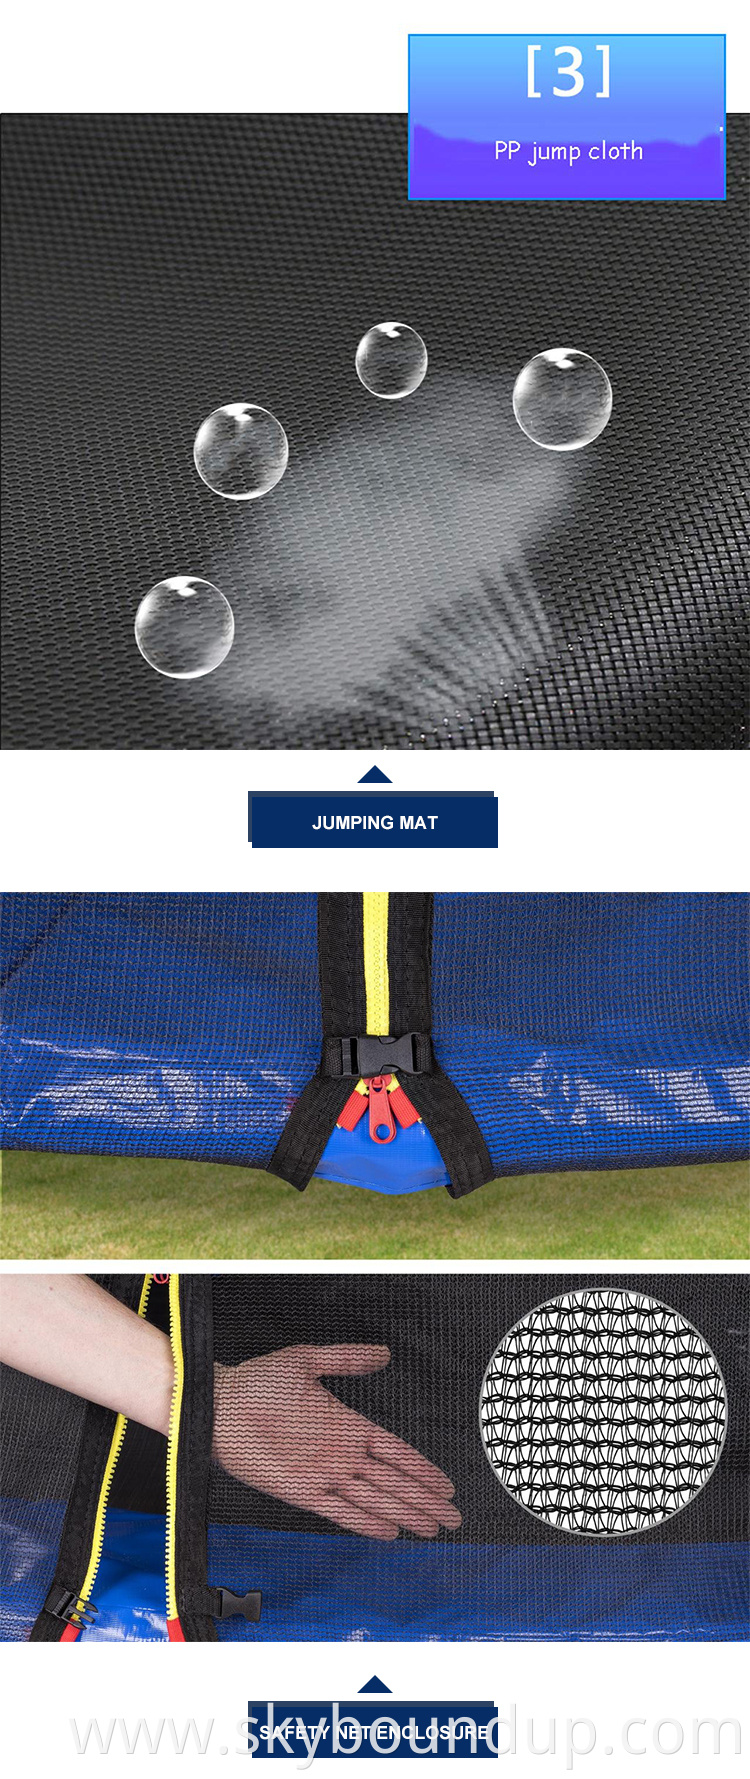 Outdoor 10/12/14/16FT Round Safety Net Trampoline for Kids Gymnastic Fitness Trampoline Park with Enclosures